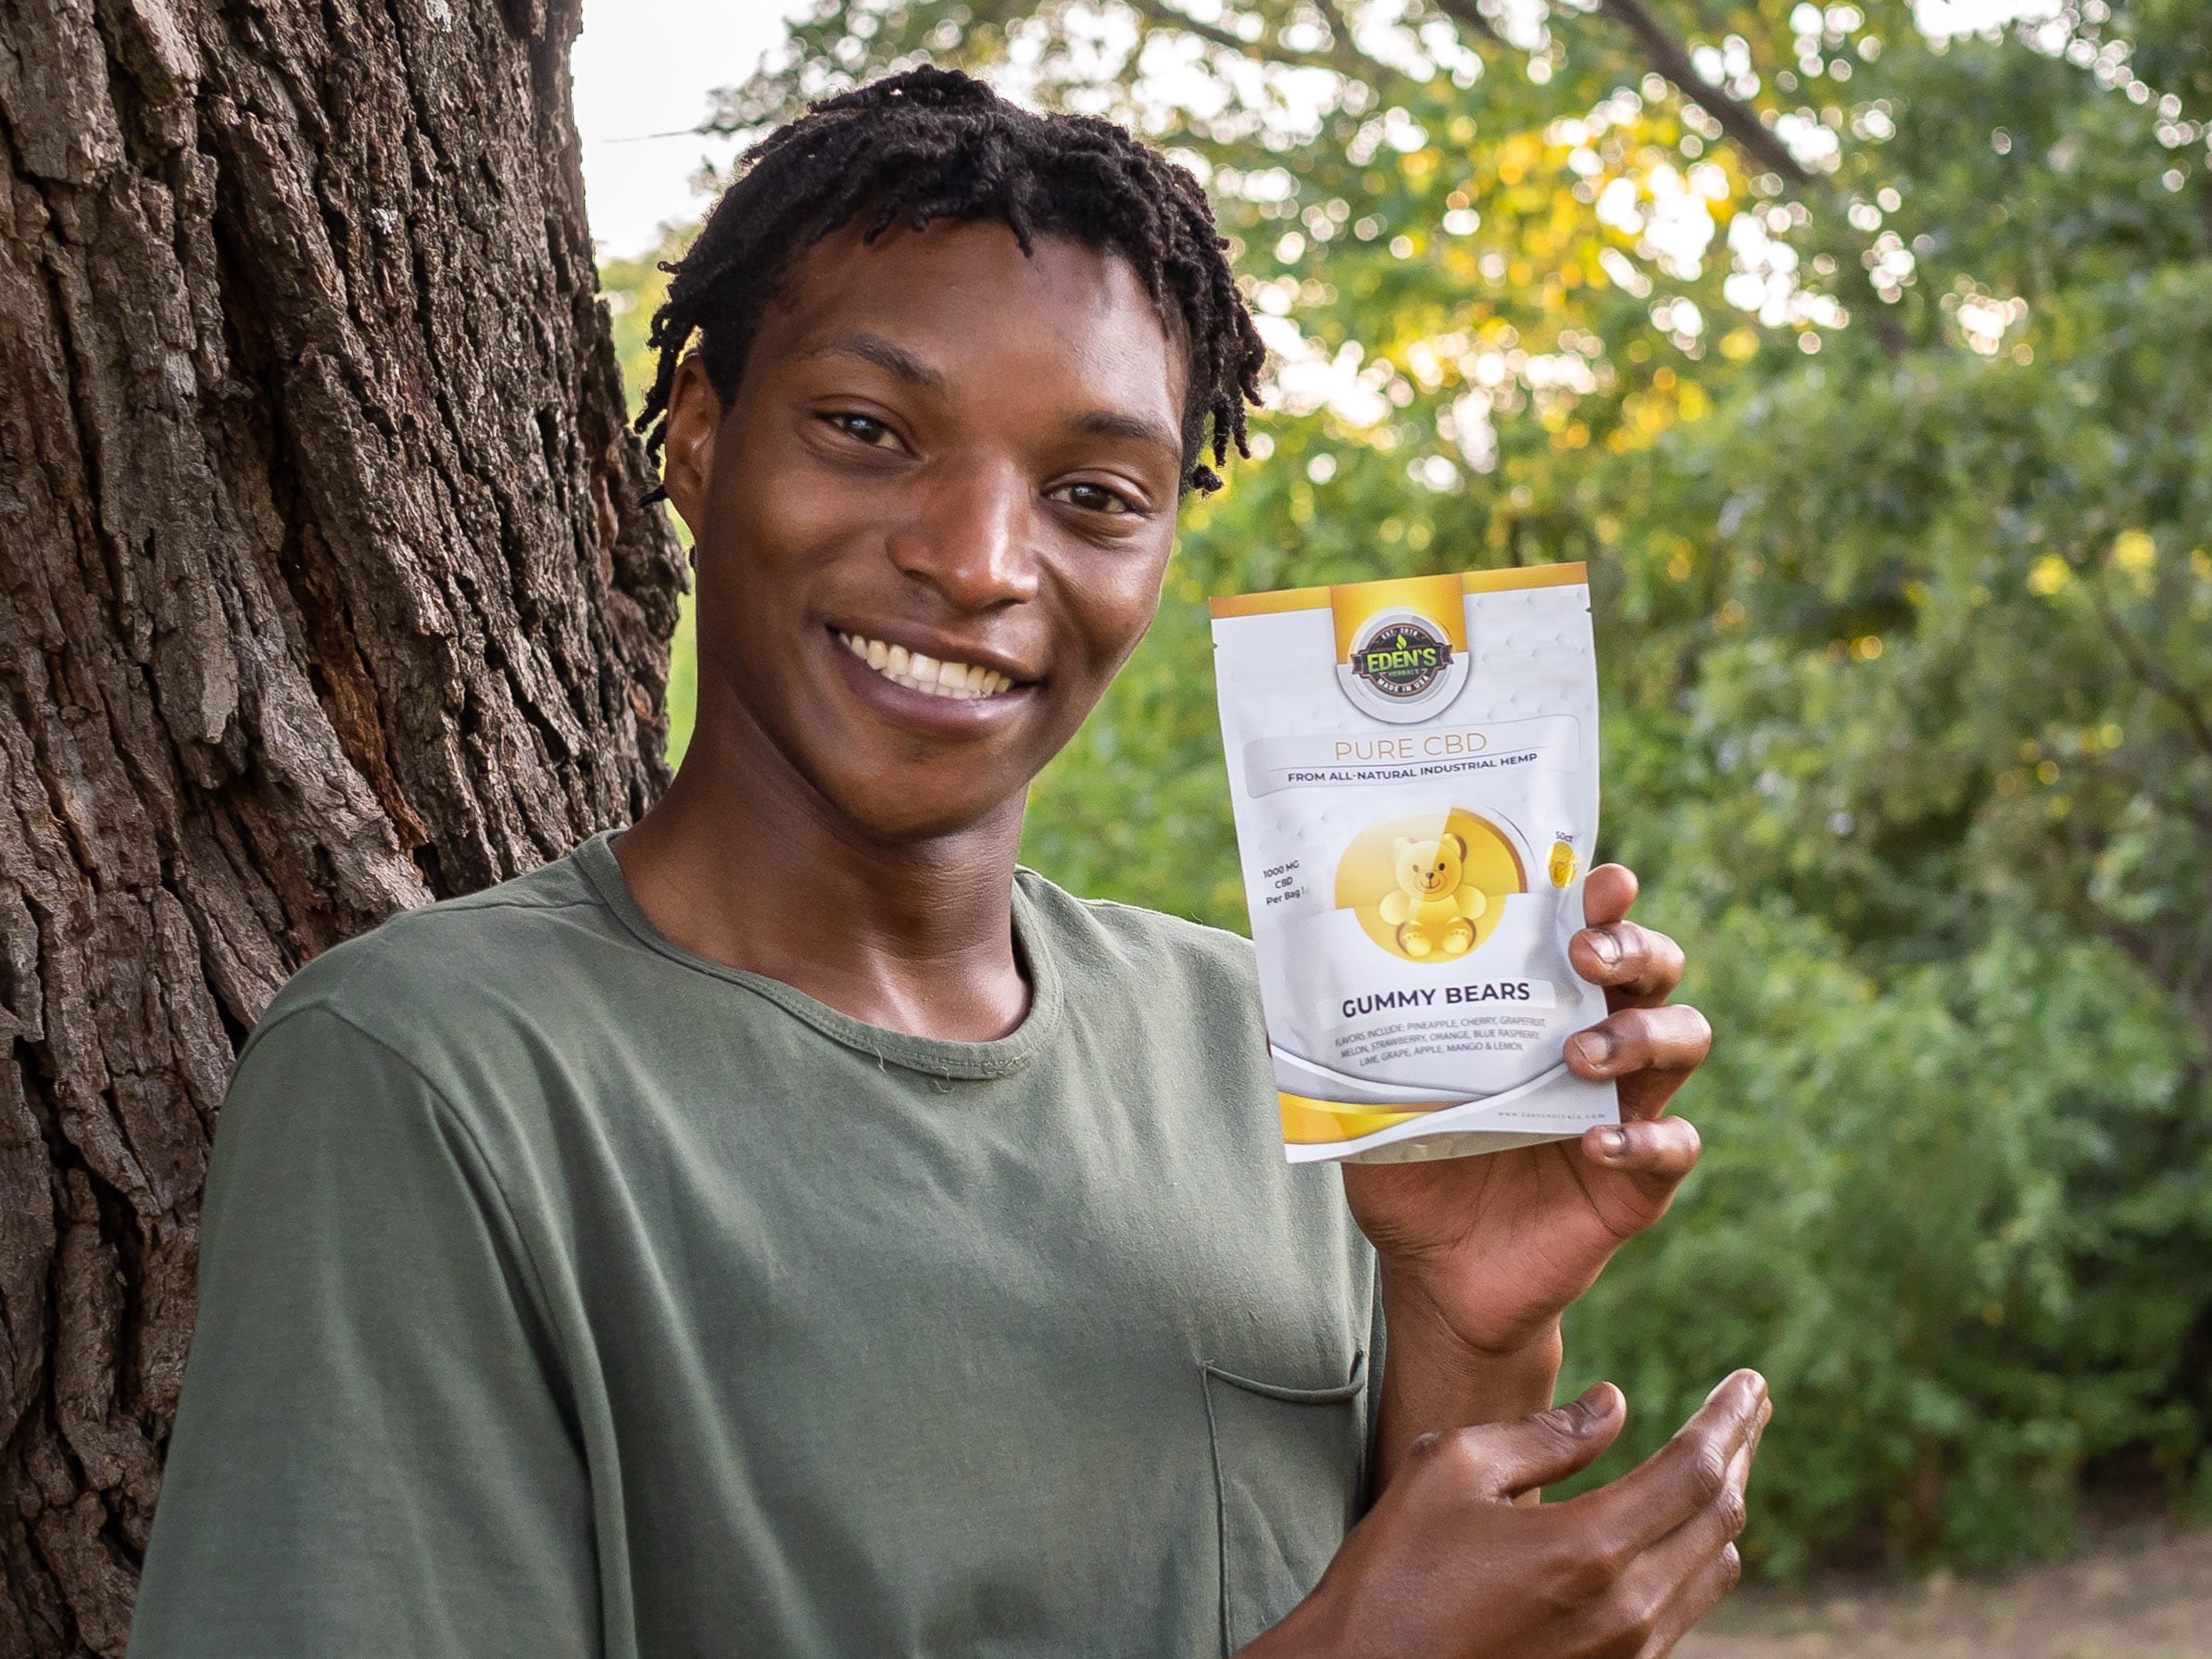 Smiling man in nature holding up a bag of CBD gummies